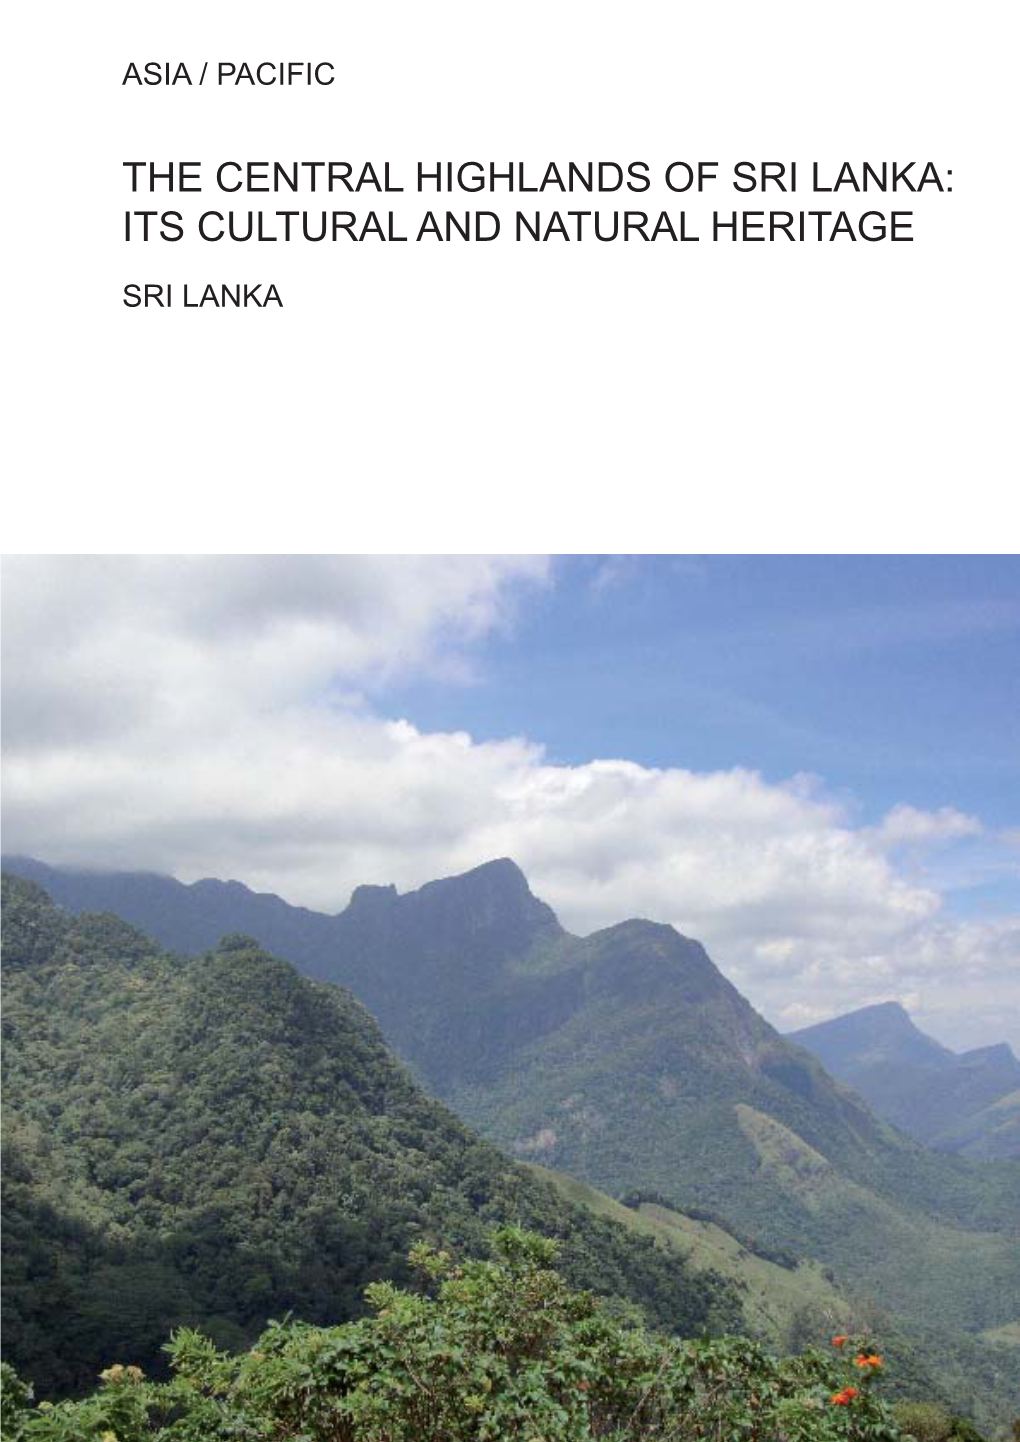 The Central Highlands of Sri Lanka: Its Cultural and Natural Heritage